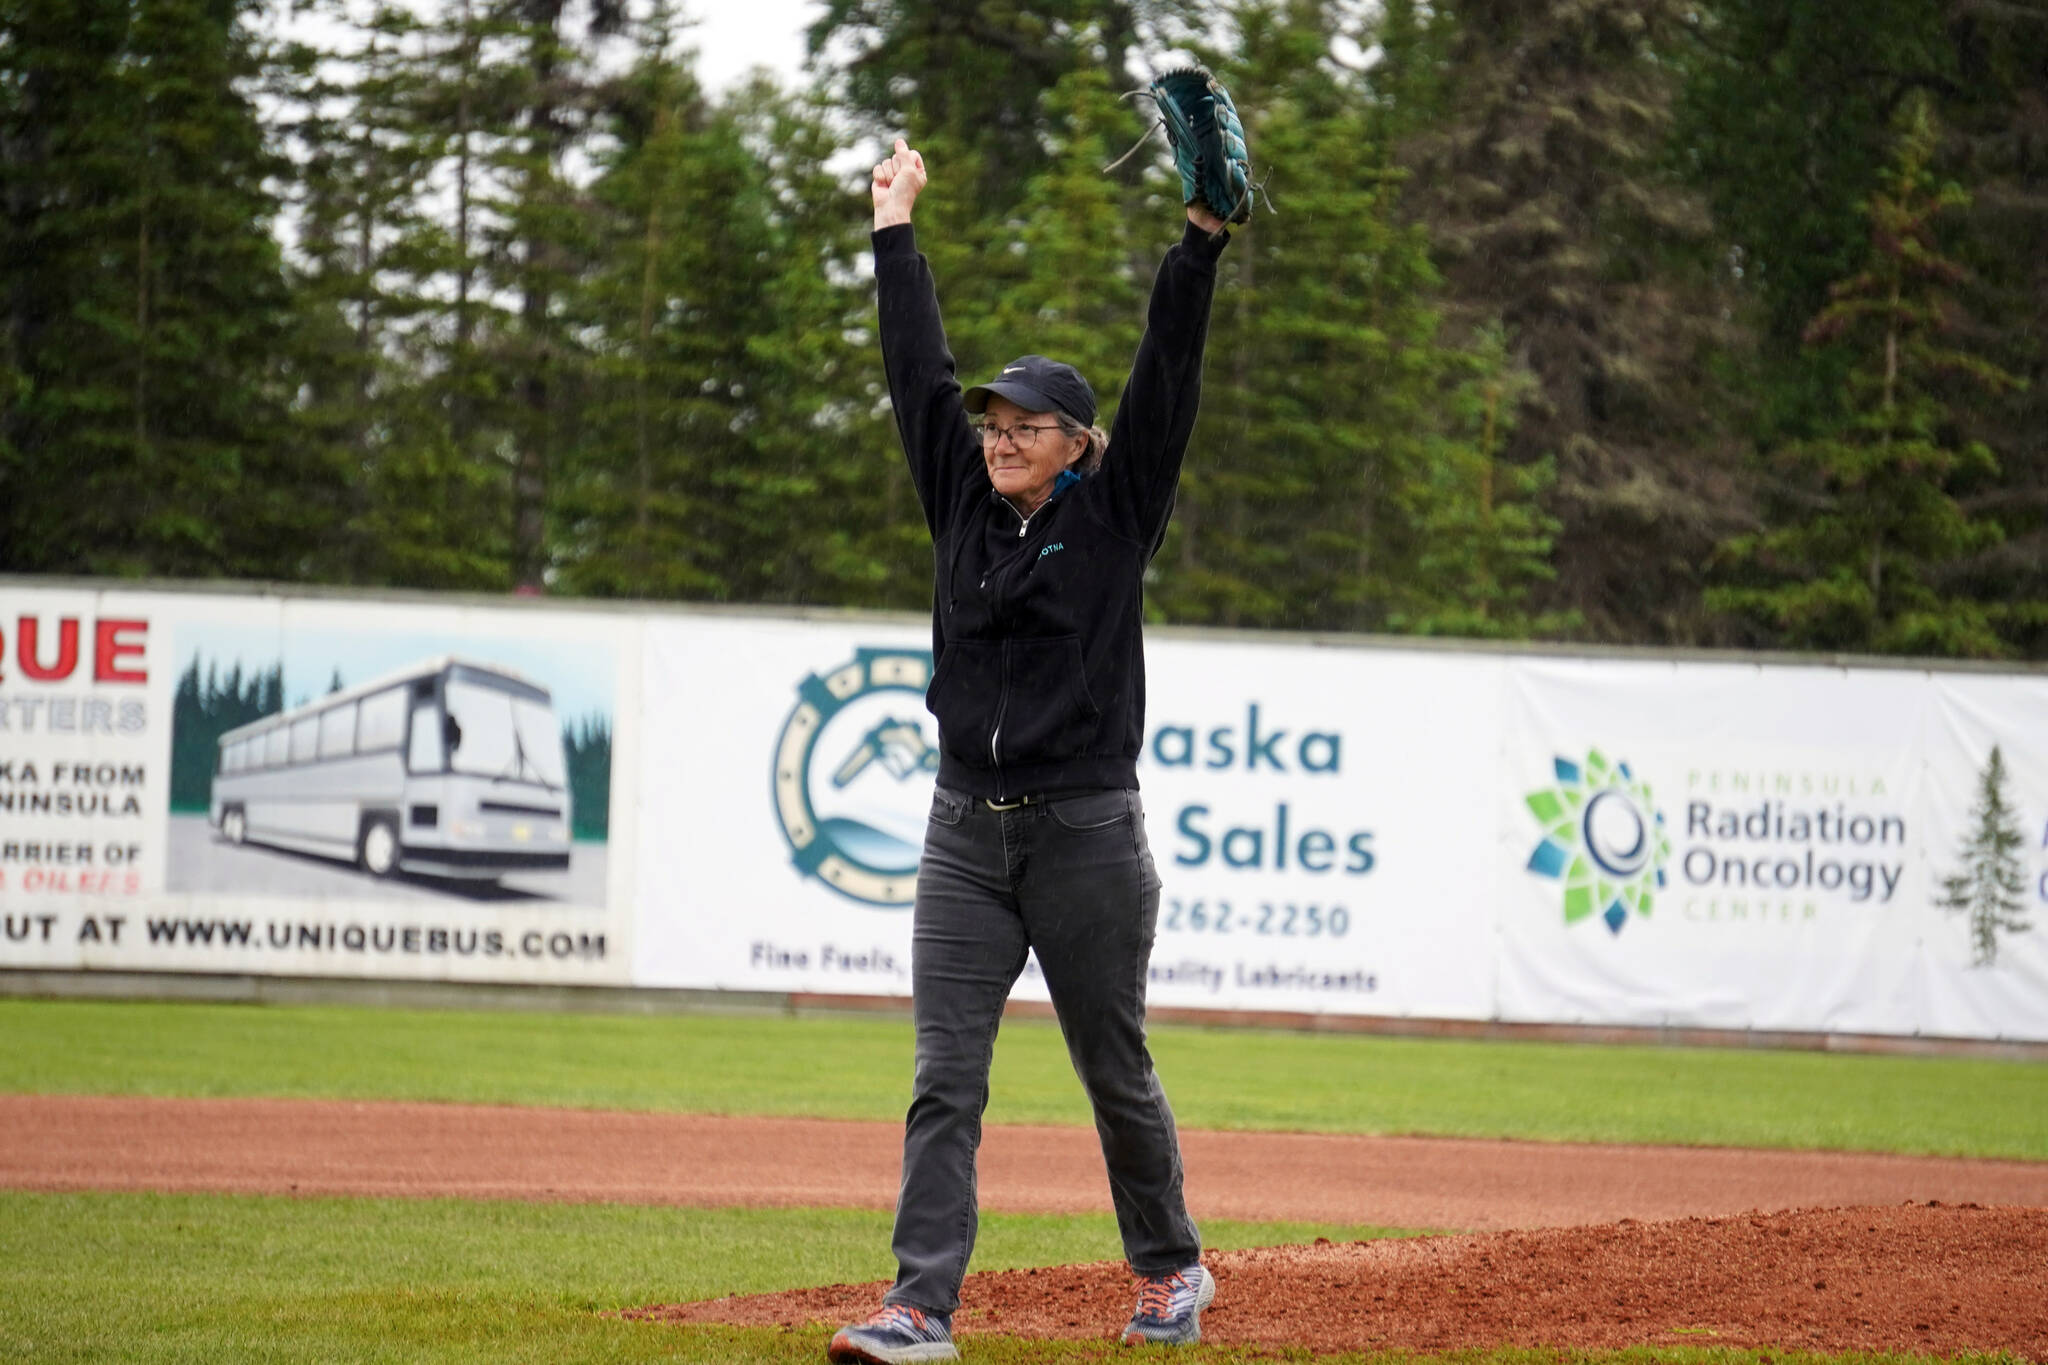 Lisa Parker, vice mayor of Soldotna, celebrates after throwing the ceremonial first pitch before a game between the Peninsula Oilers and the Mat-Su Miners on Tuesday, July 4, 2023, at Coral Seymour Memorial Park in Kenai, Alaska. (Jake Dye/Peninsula Clarion)